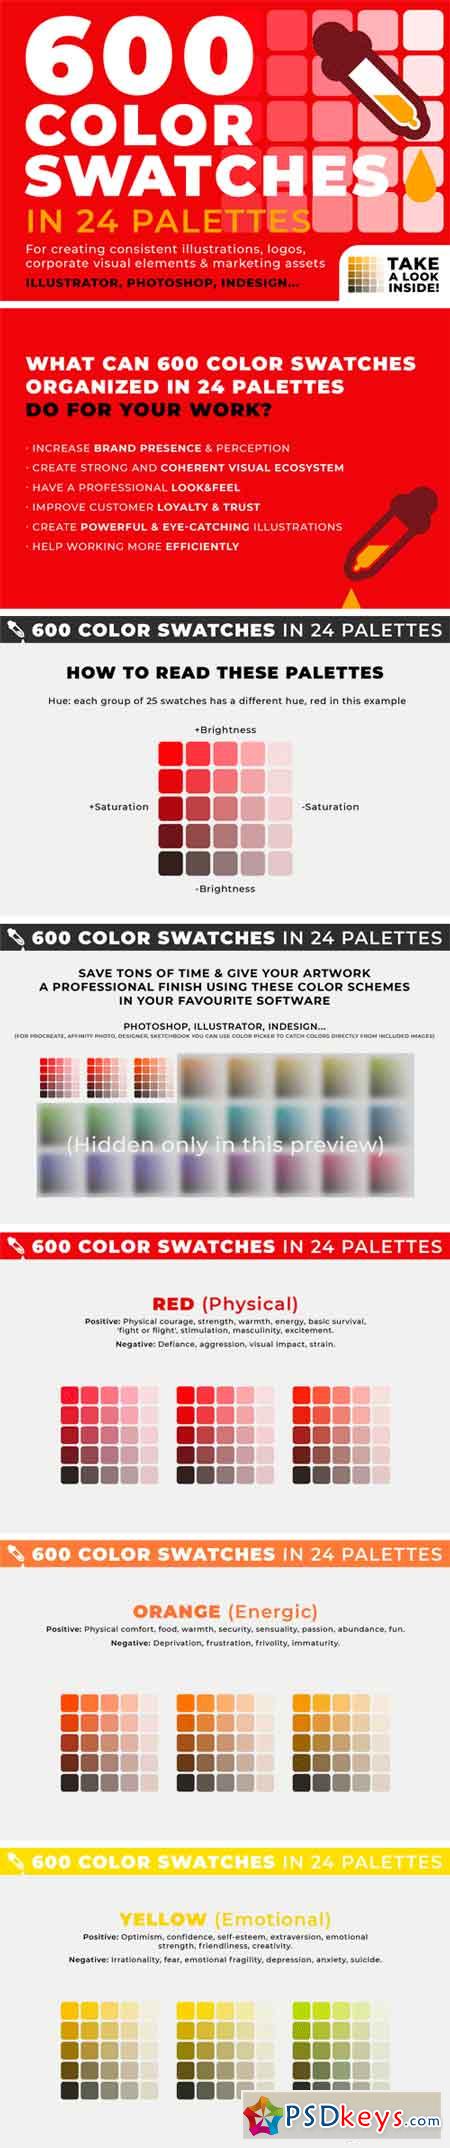 600 Color Swatches in 24 Palettes